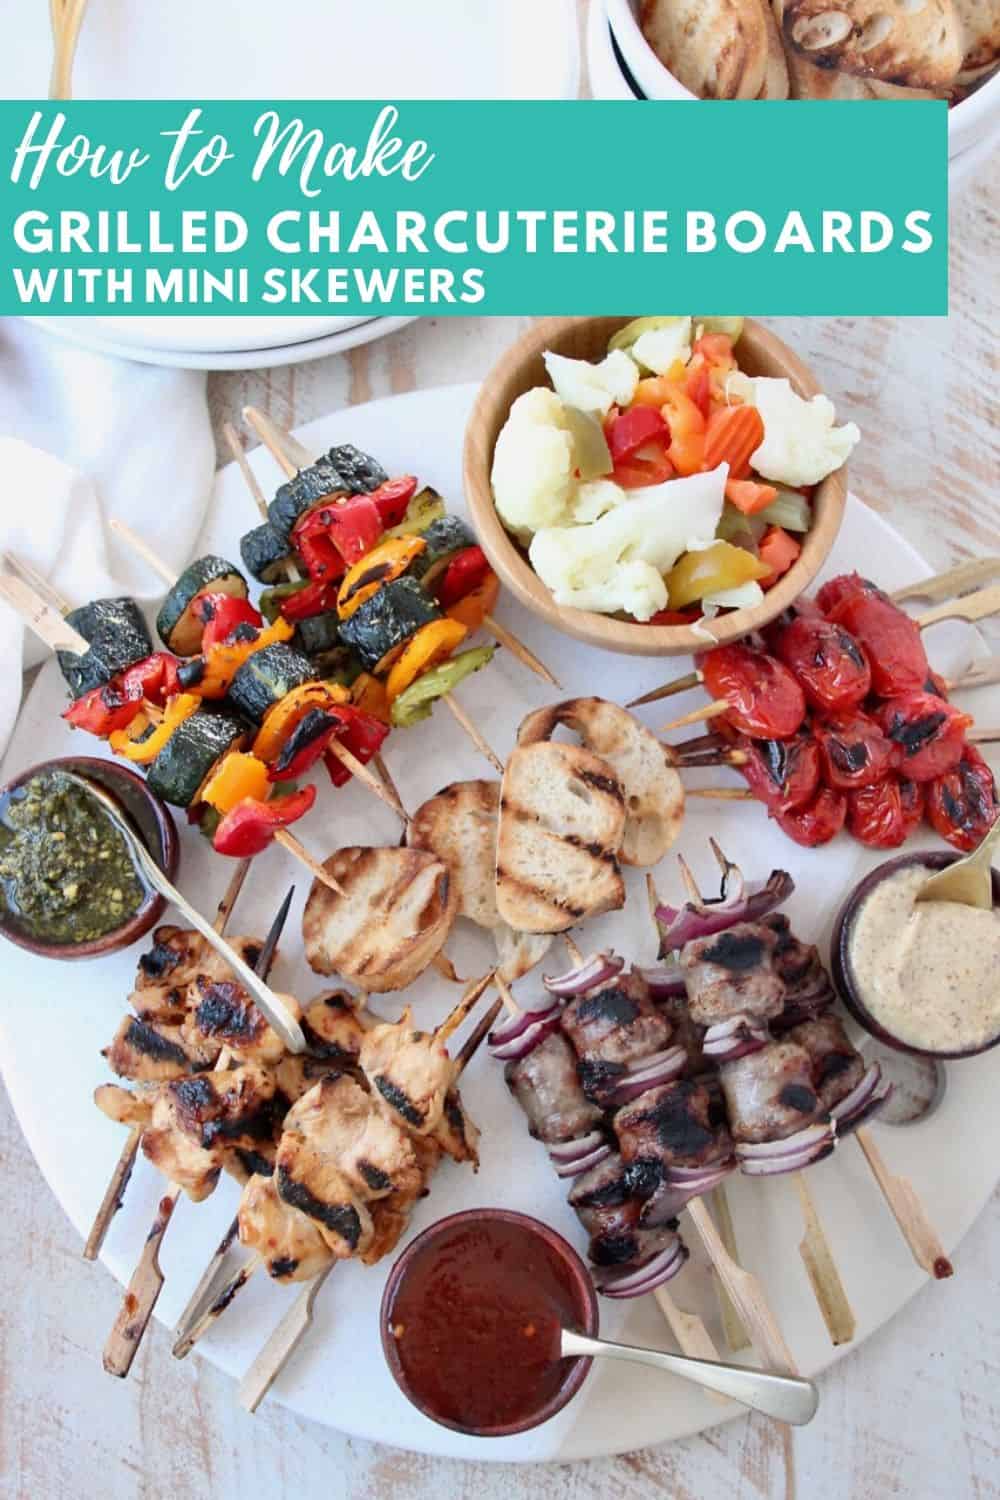 Grilled Charcuterie Board with Mini Skewers - WhitneyBond.com